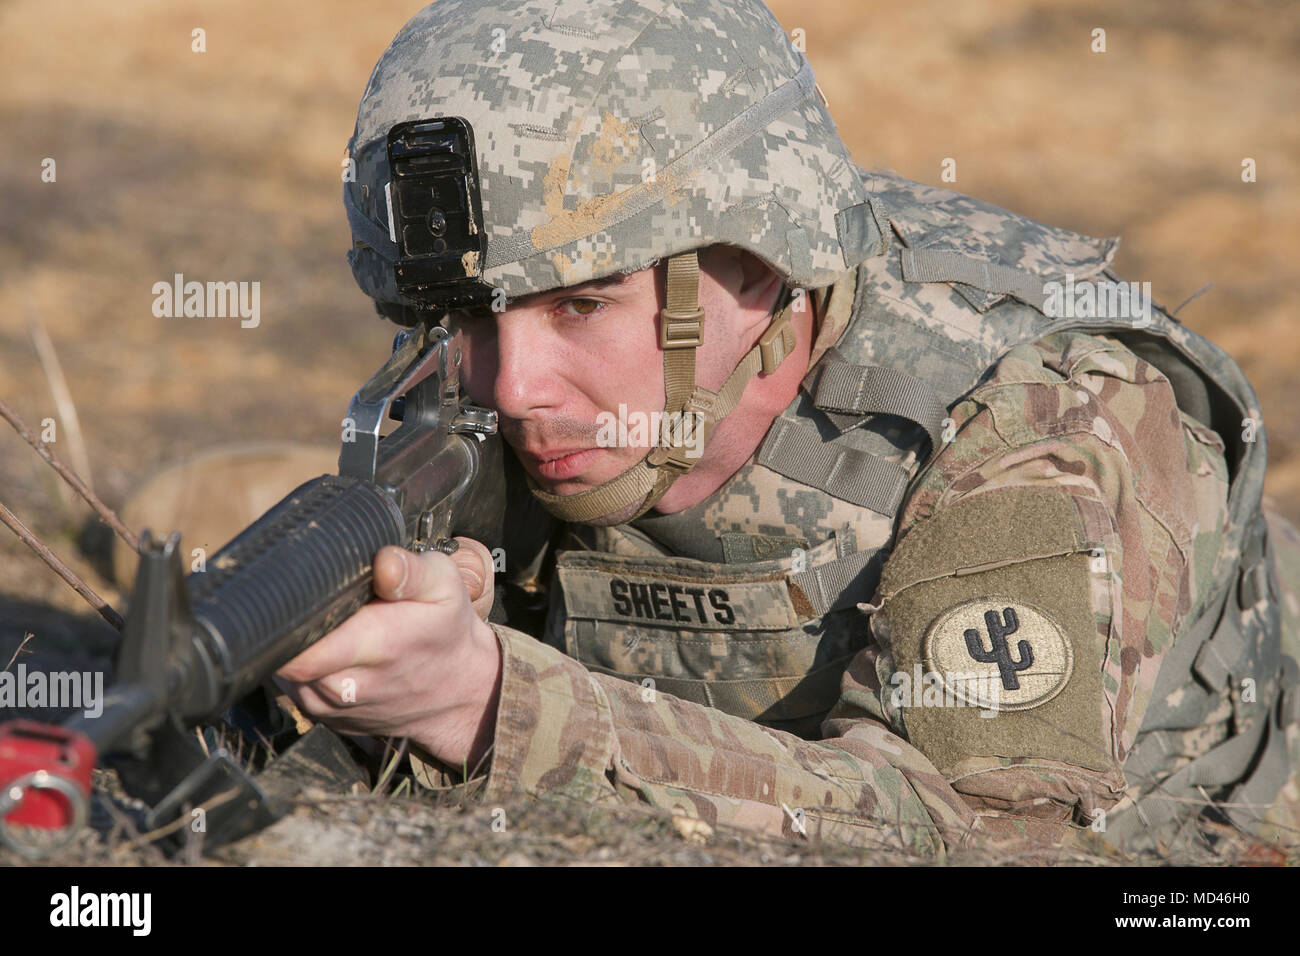 A U.S. Army Reserve Soldier aims his M16 rifle at a target, during a training event at Tactical Assembly Area Poorman during the Combat Support Training Exercise (CSTX) at Fort Knox, Kentucky, March 15, 2018. CSTX 78-18-03 is a training exercise that ensures America's Army Reserve units and Soldiers are trained and ready to deploy on short-notice and bring capable, combat-ready and lethal firepower in support of the Army and our joint partners anywhere in the world. (U.S. Army Reserve photo by Spc. Torrance Saunders) Stock Photo